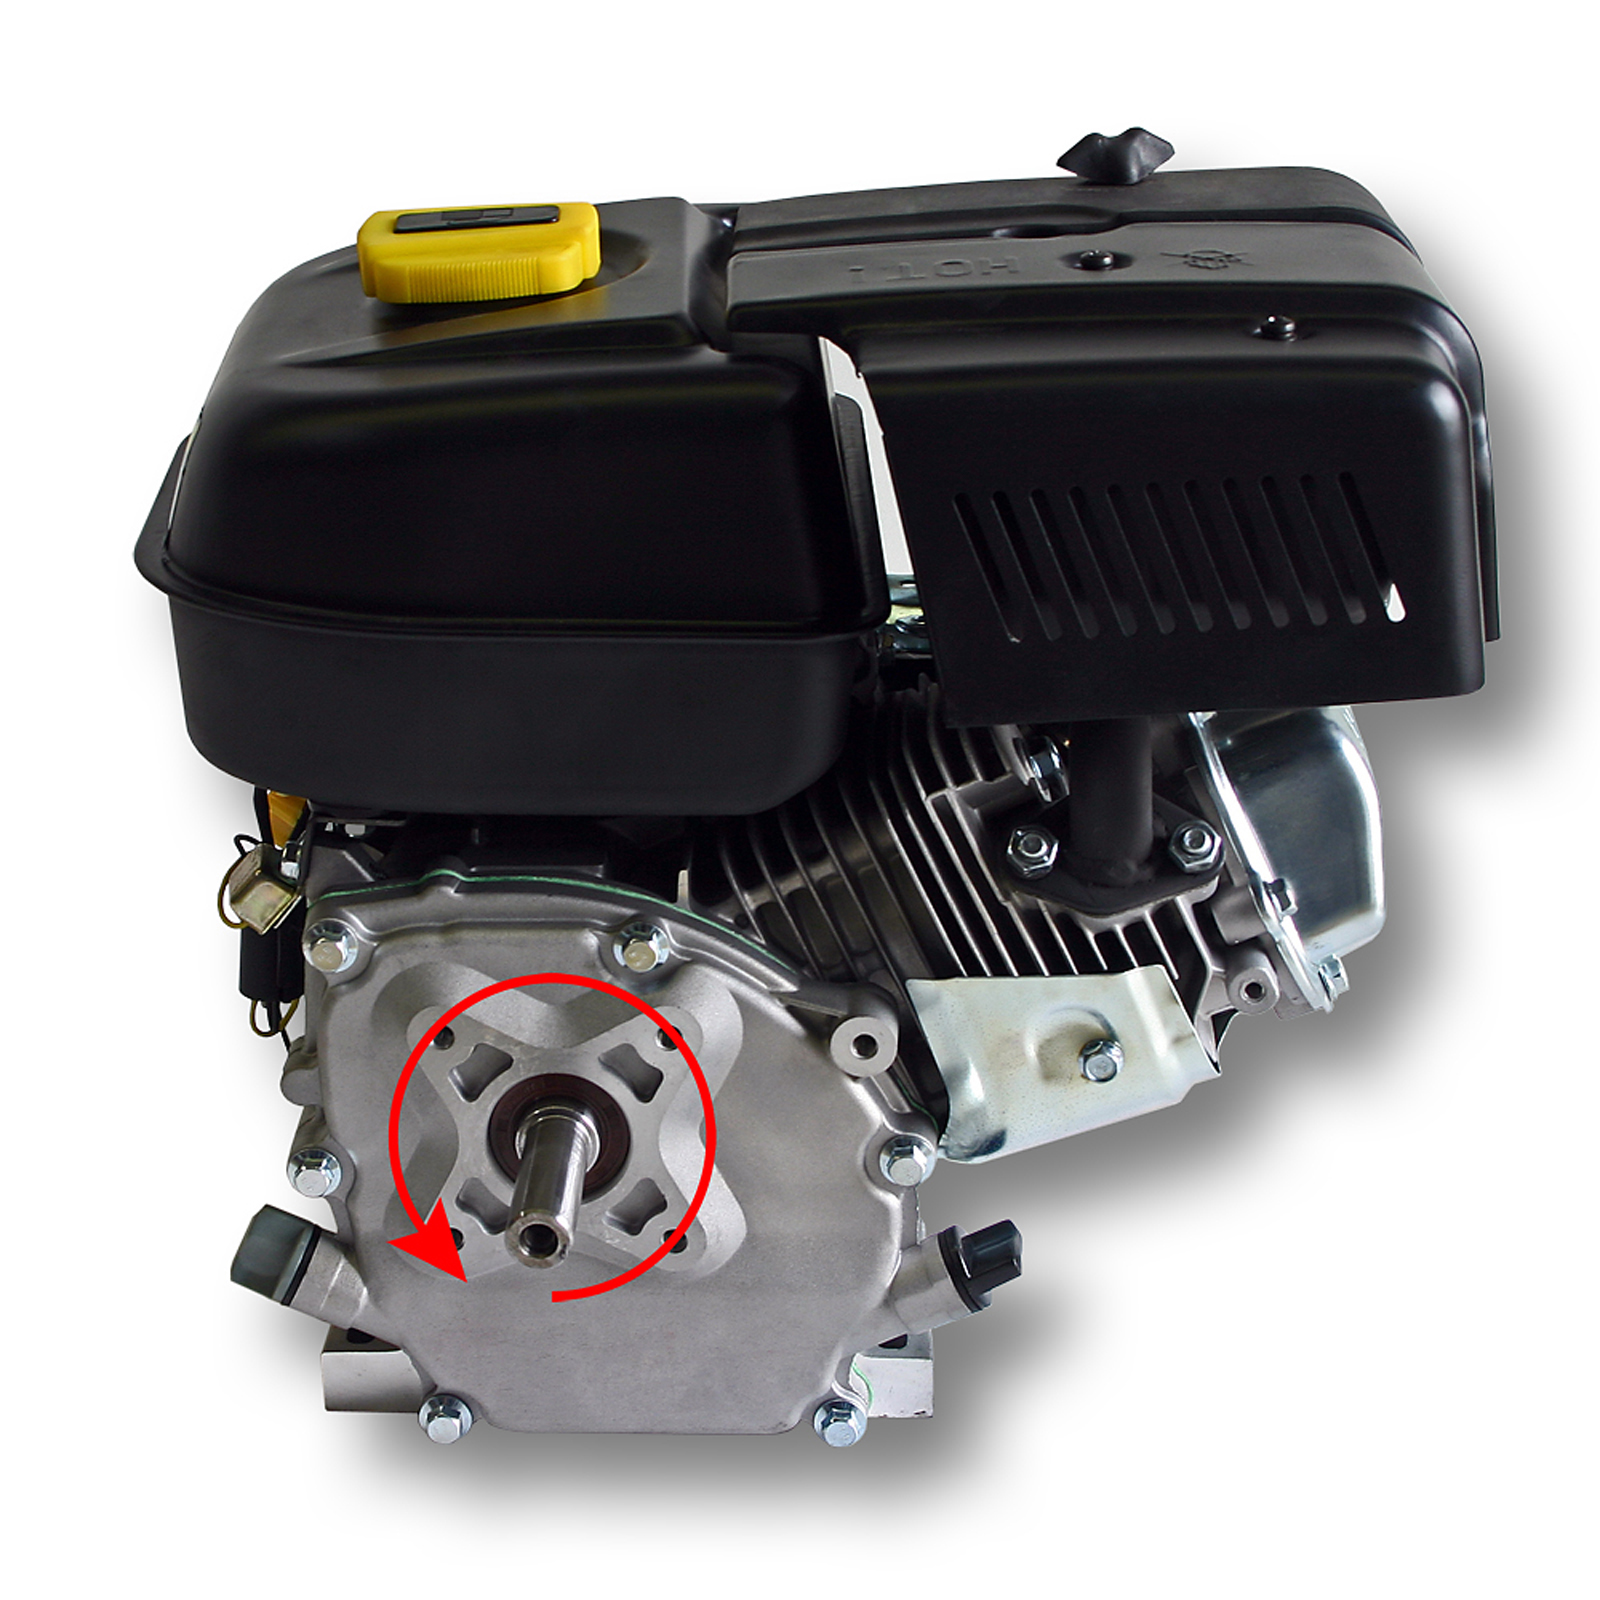 15mm Wiltec LIFAN 152 petrol gasoline engine 1.8kW 2.45HP 0.5 air-cooled single cylinder recoil start